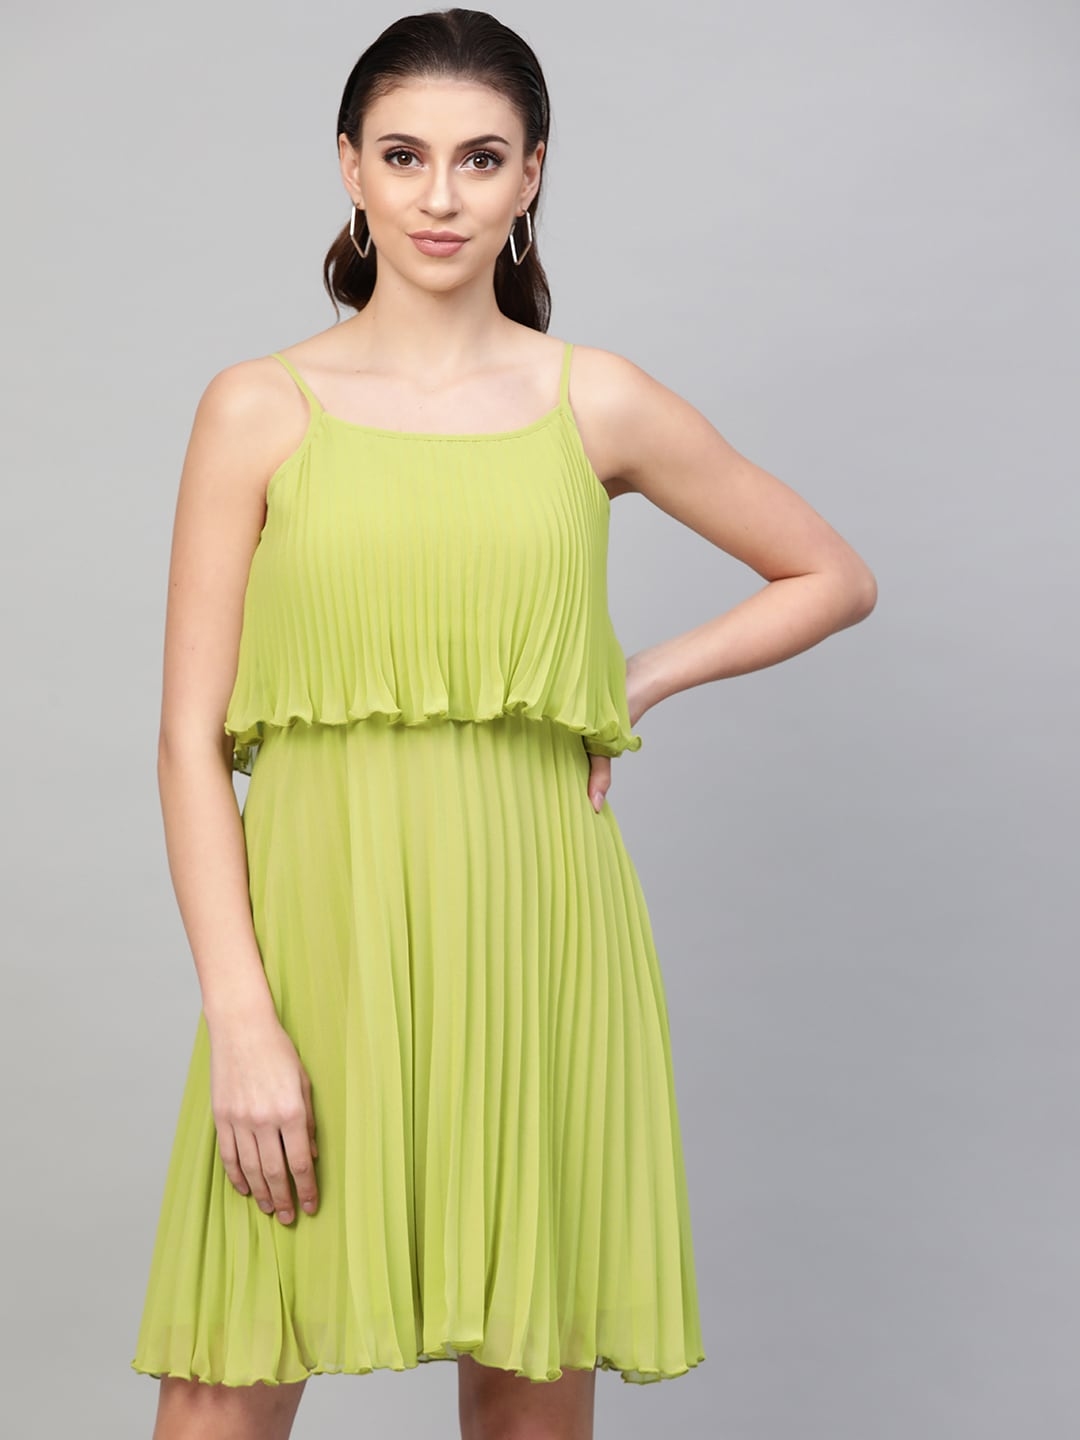 Buy SASSAFRAS Lime Green Accordion Pleated A Line Dress - Dresses